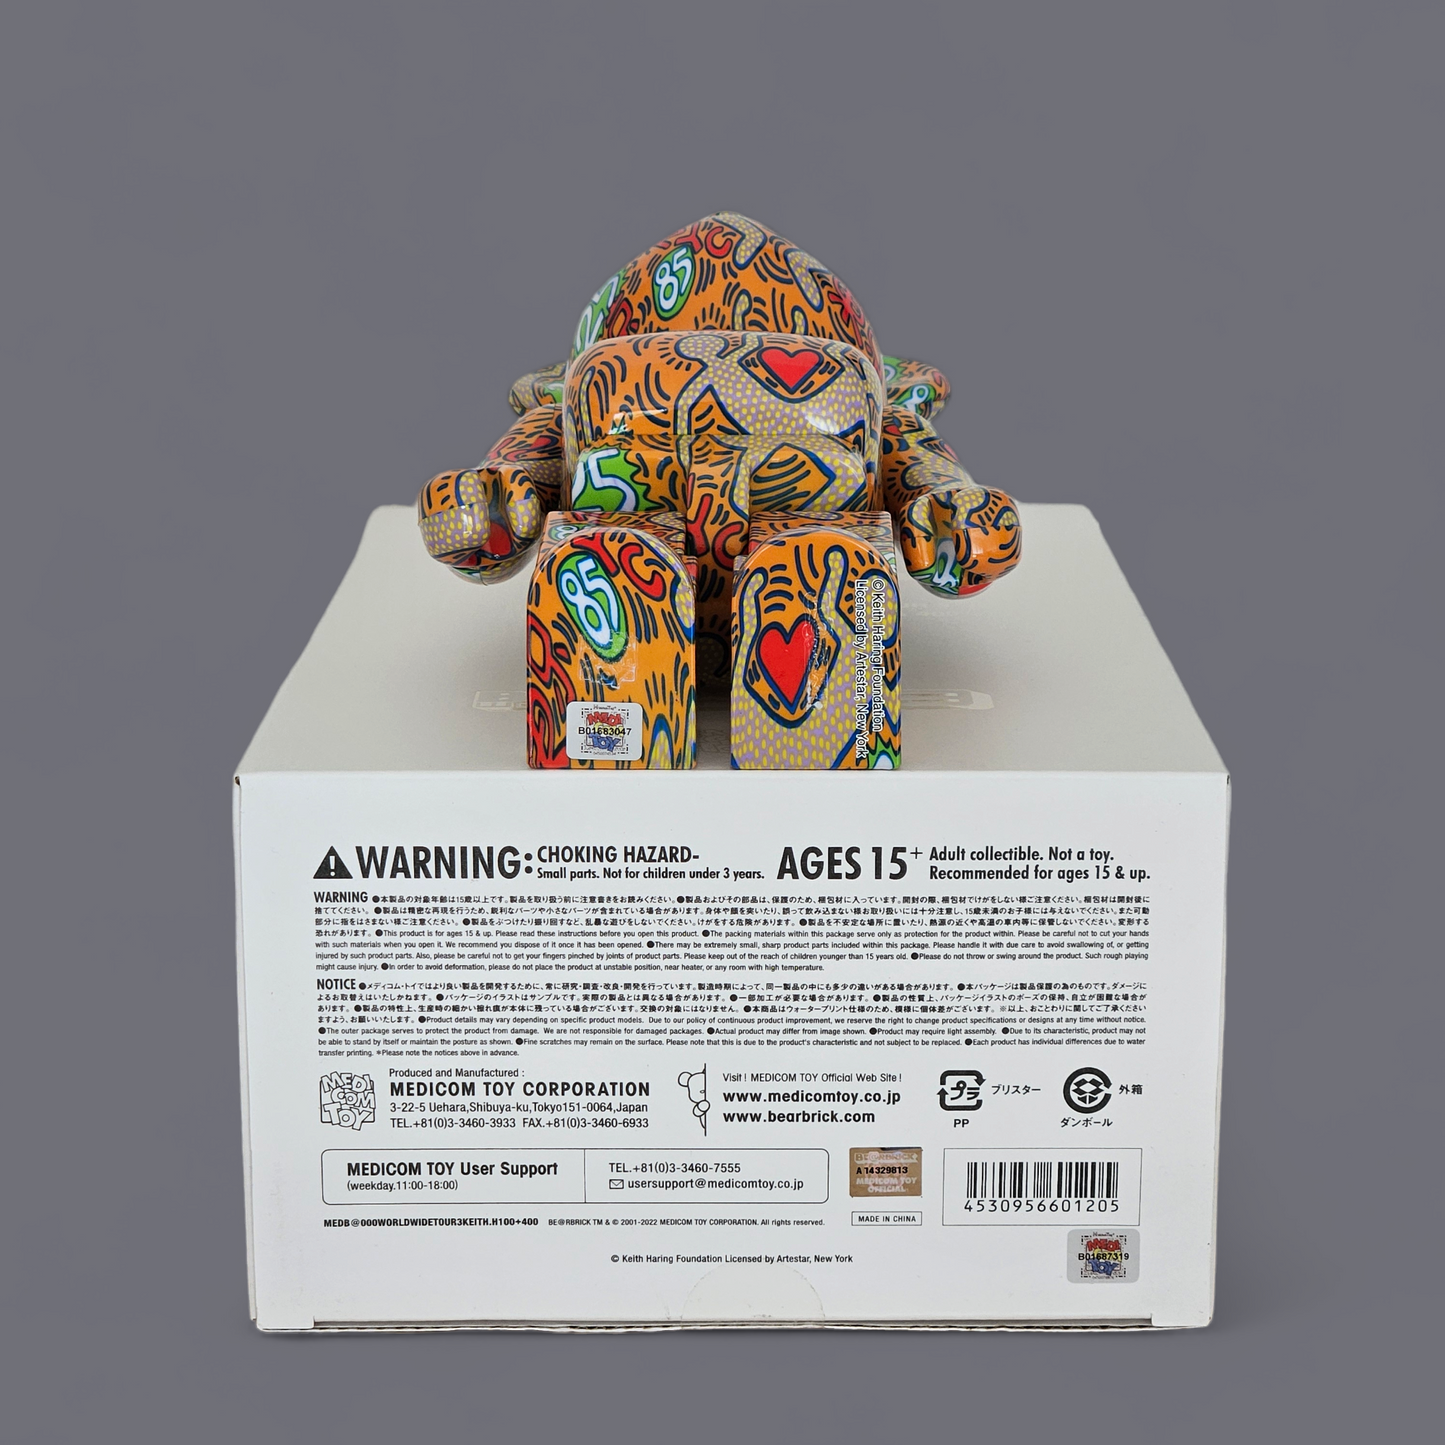 BE@RBRICK Keith Haring "Special" (100%+400%)